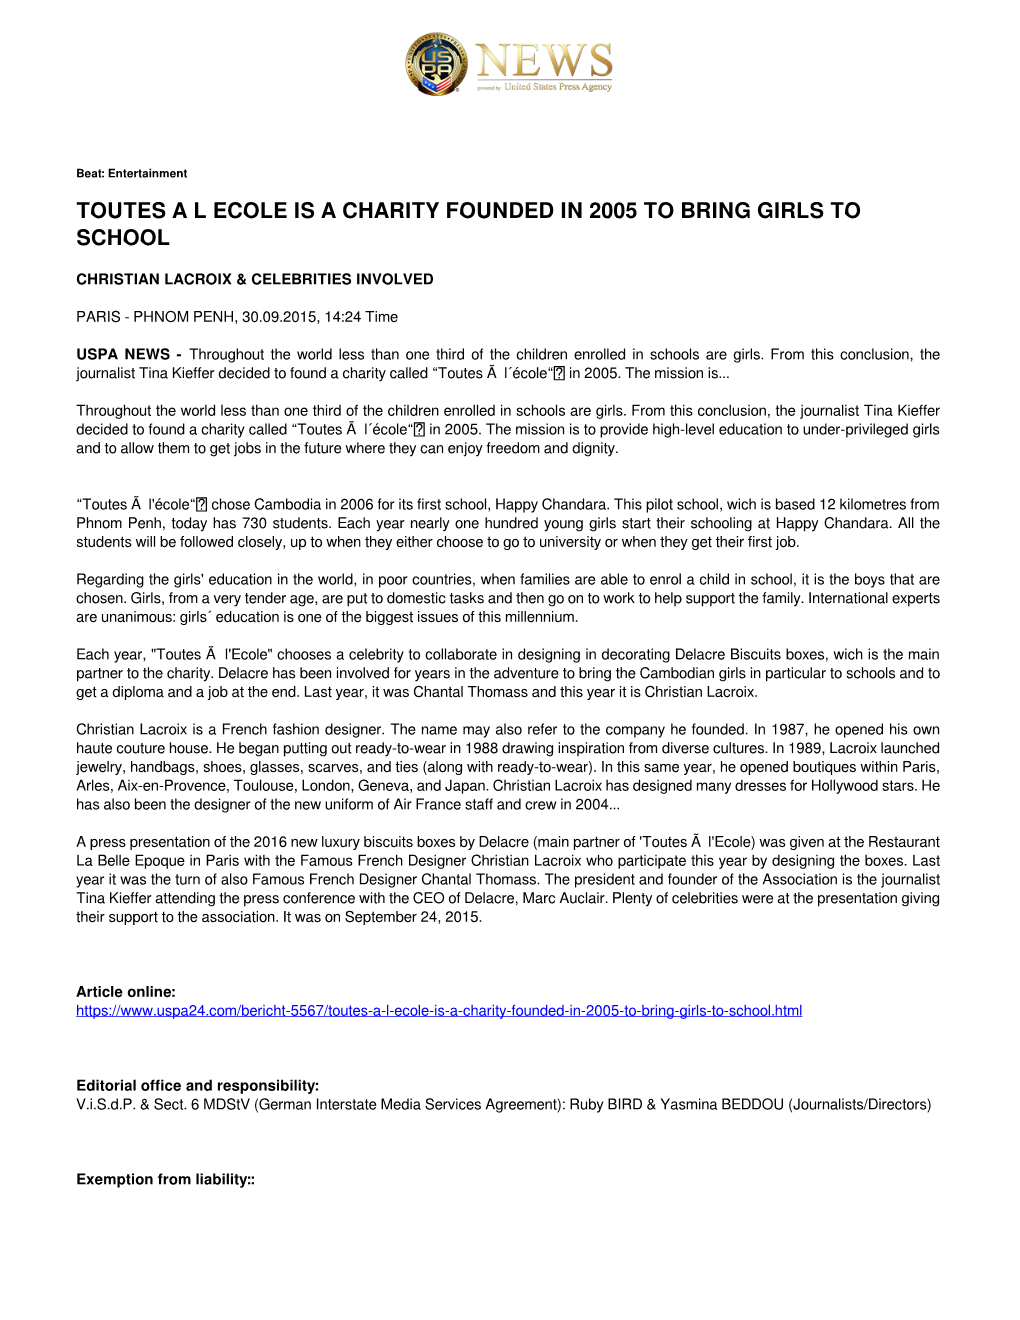 Toutes Al Ecole Is a Charity Founded In